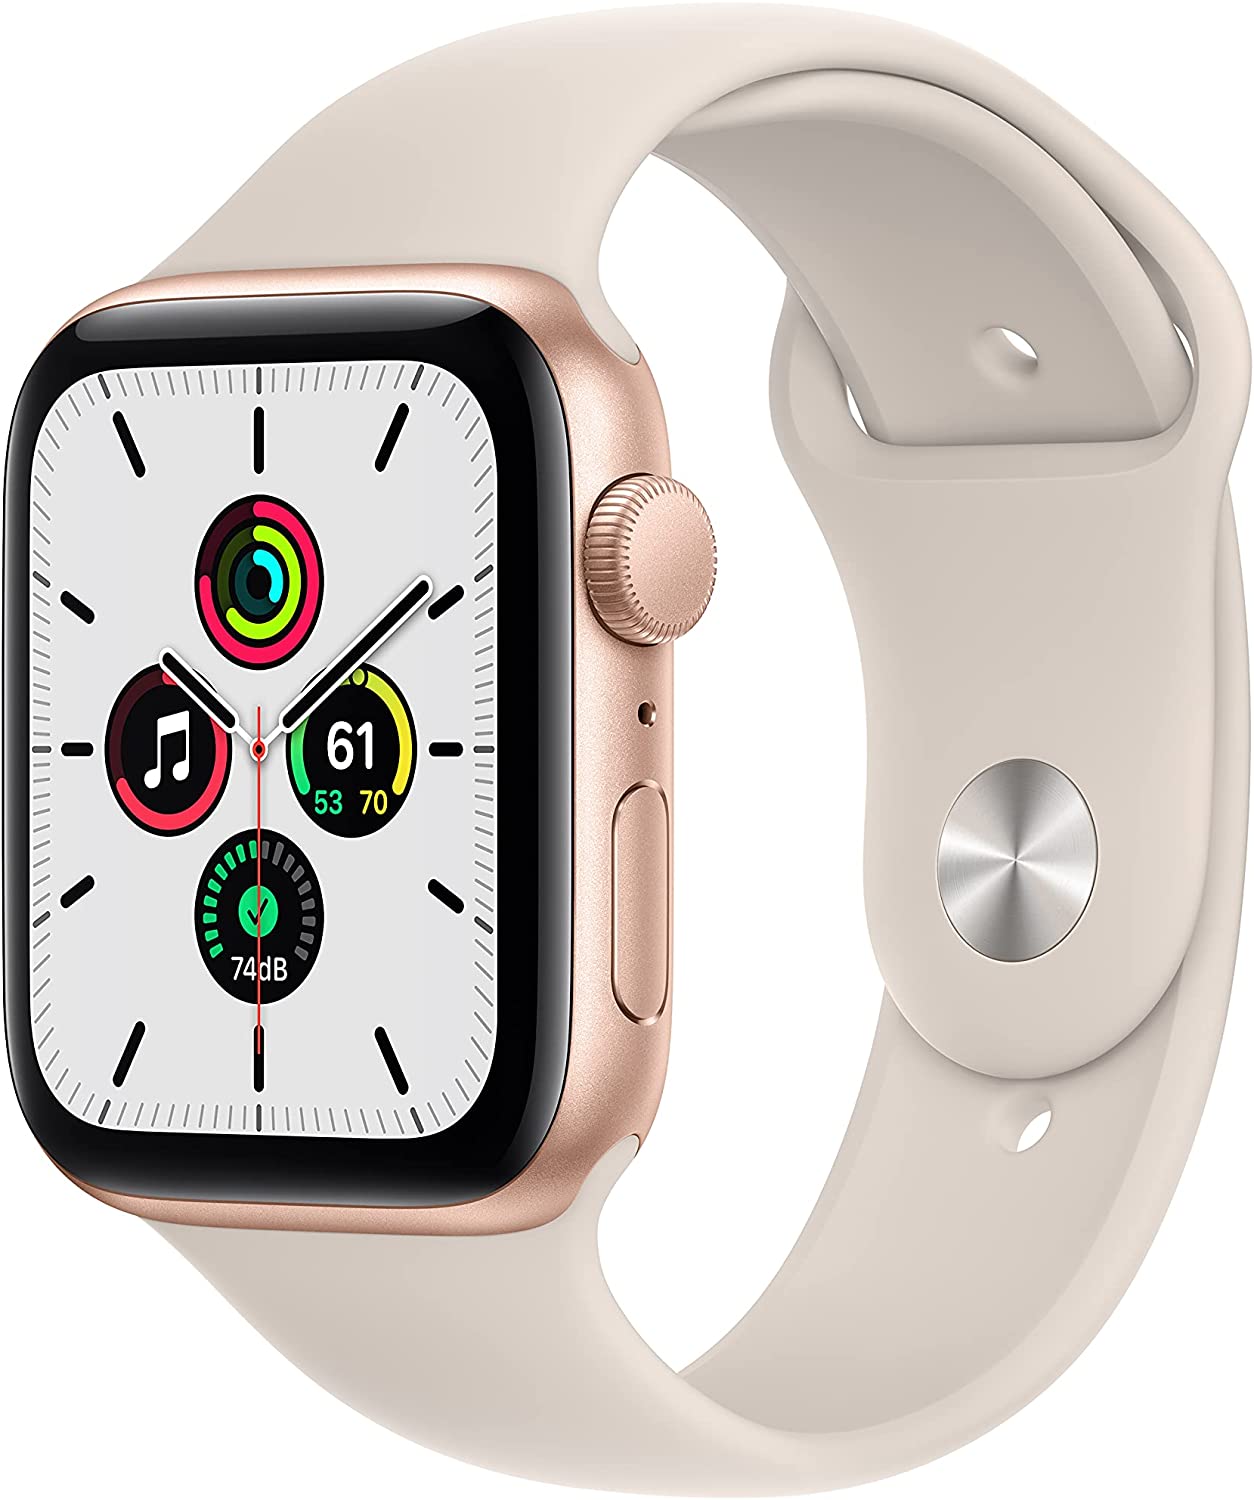 Apple Watch SE (GPS, 44mm) – Gold Aluminum Case with Starlight Sport Band for ONLY $249 Shipped (Was $309)!!!